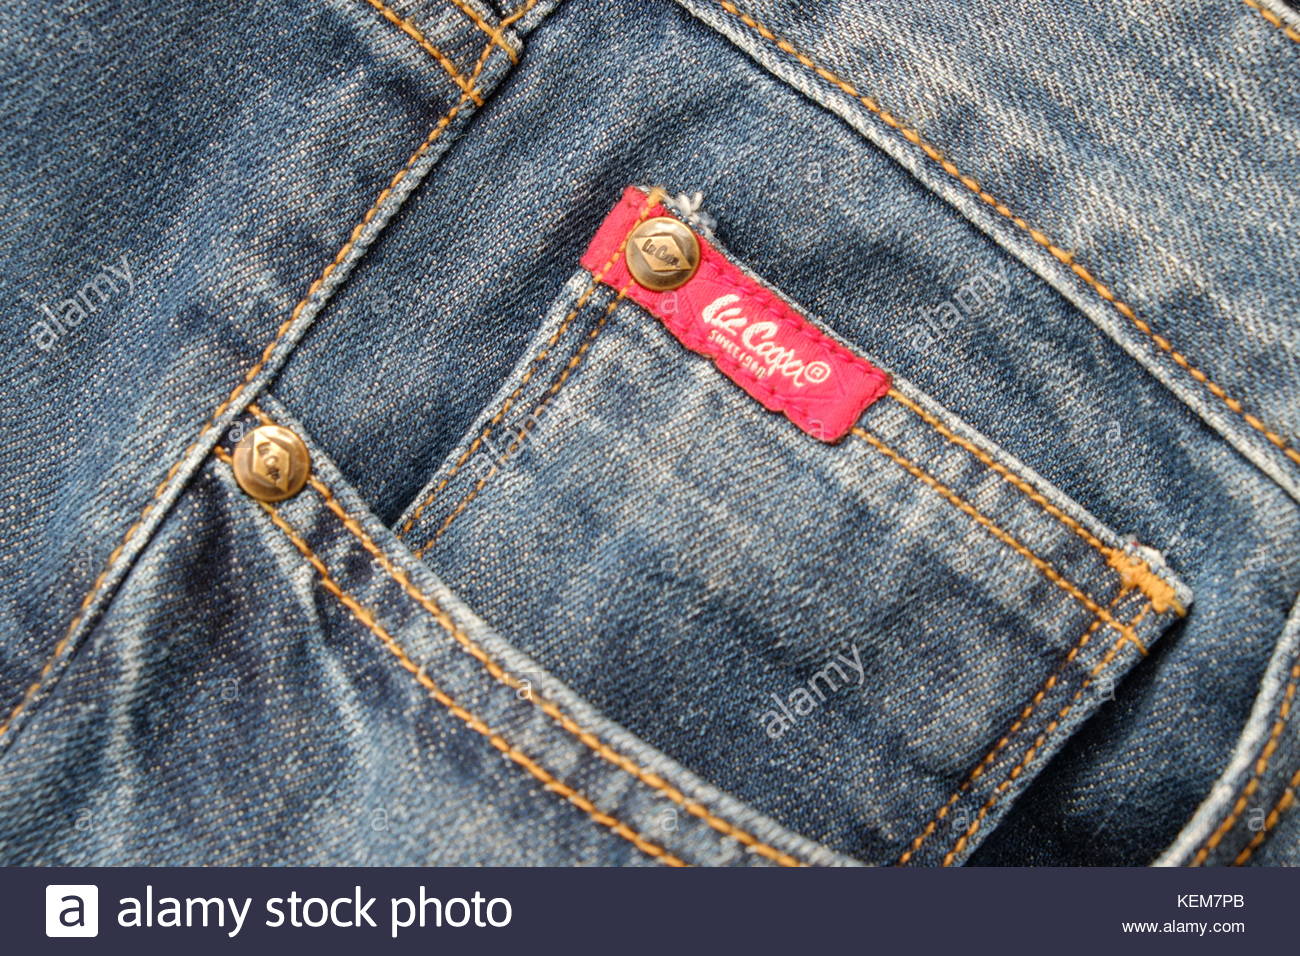 Lee Jeans High Resolution Stock Photography and Images - Alamy